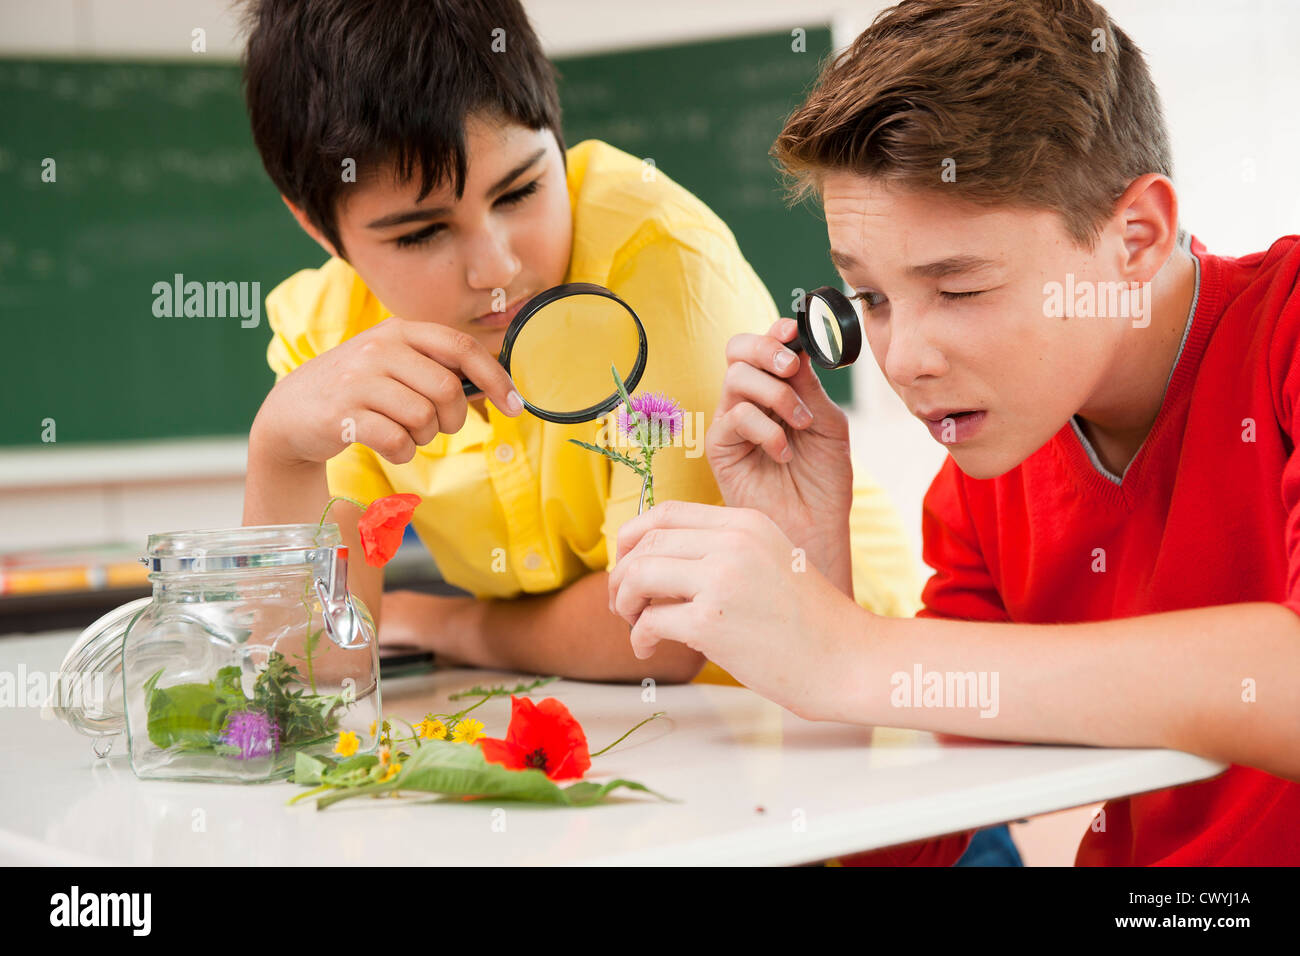 Two schoolboys examining blossoms in classroom Stock Photo